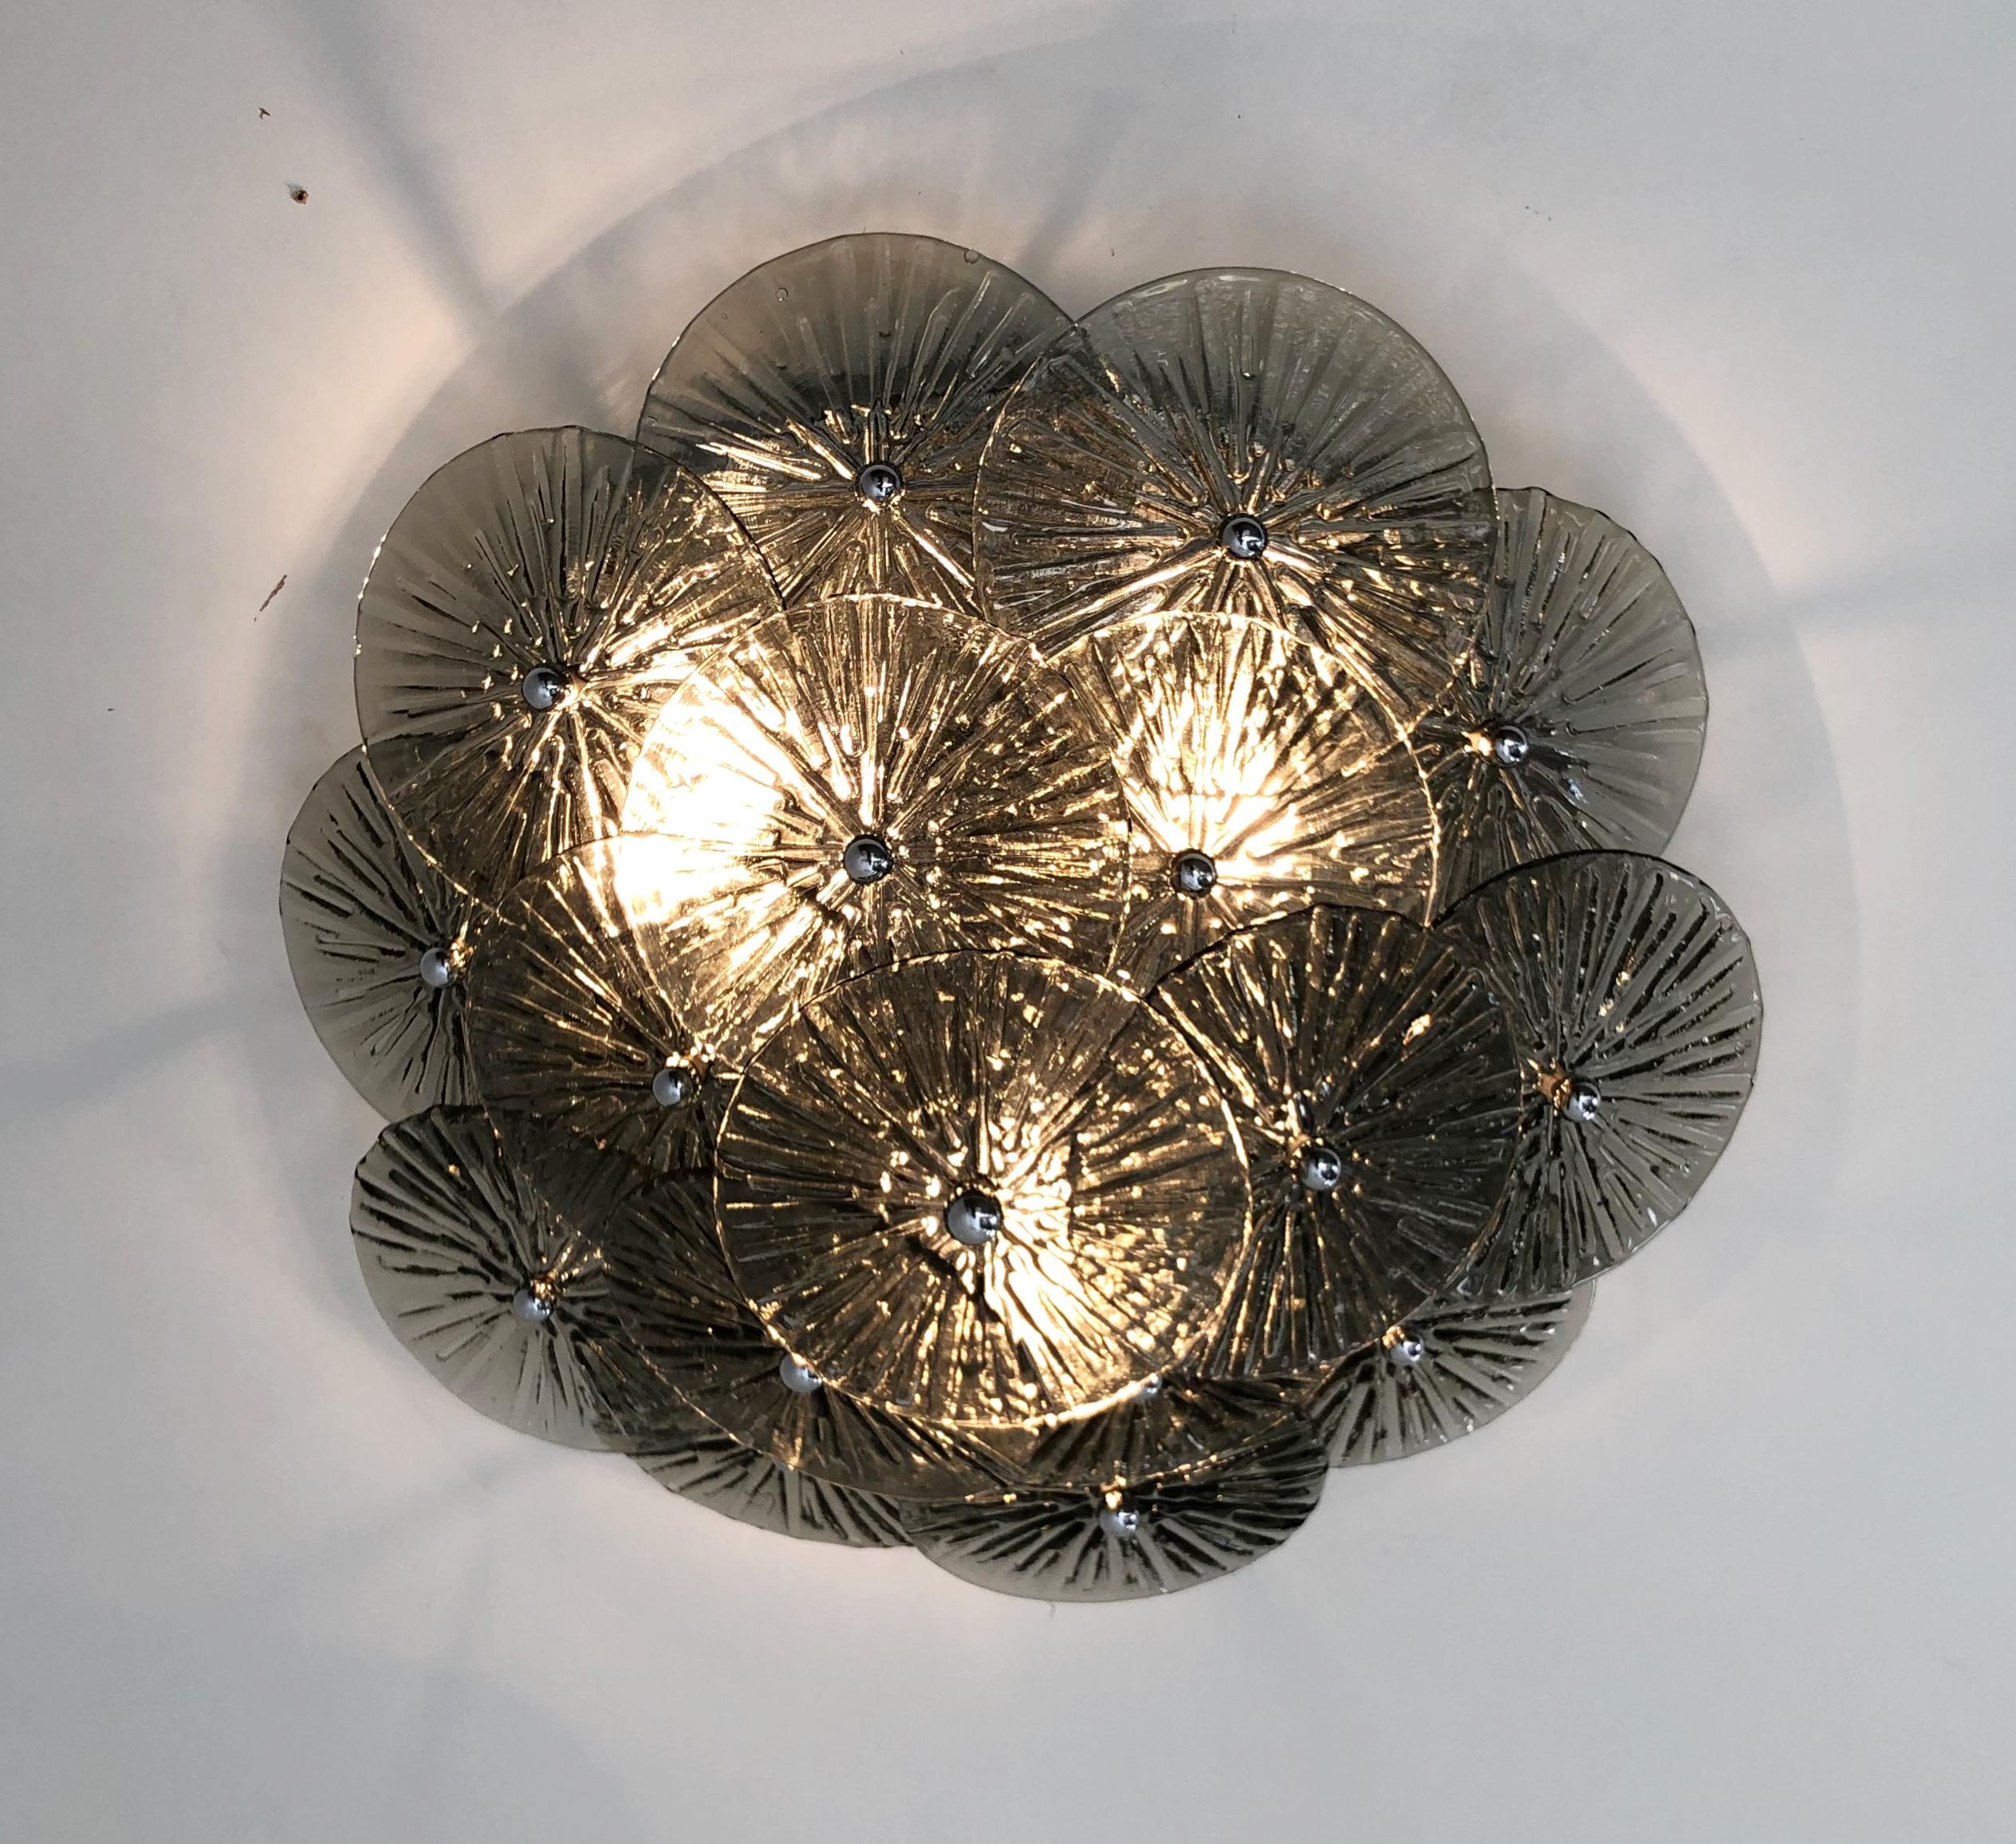 Italian flush mount with layered textured smoky Murano glass discs mounted on polished chrome finish metal frame, designed by Fabio Bergomi for Fabio Ltd / Made in Italy
3 lights / E12 or E14 type / max 40W each
Measures: Diameter 20 inches, height